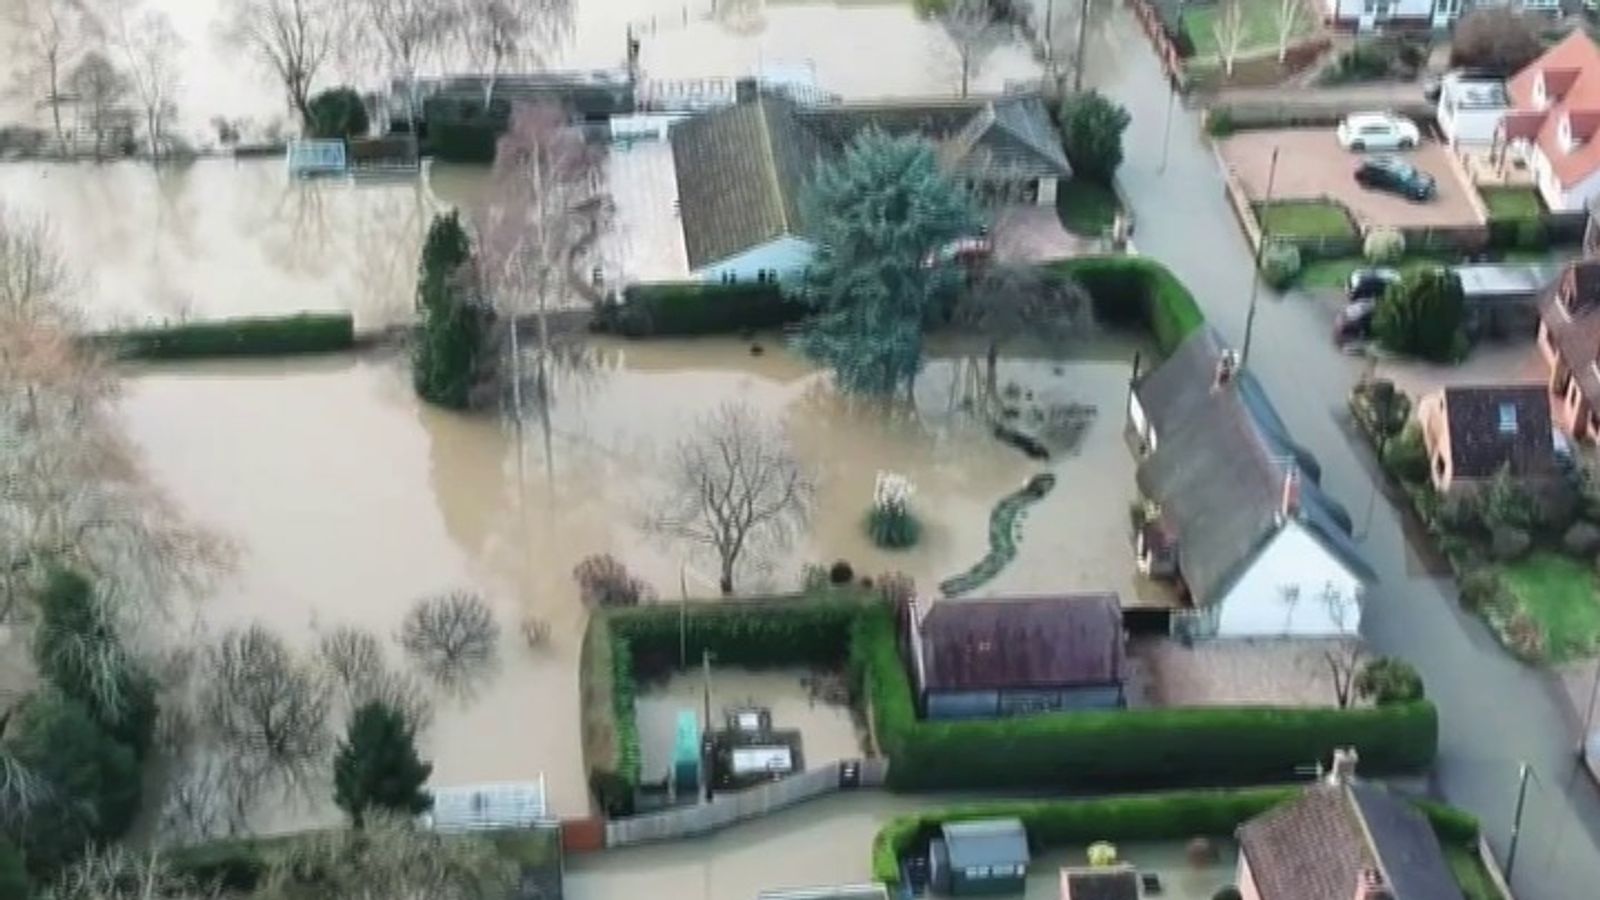 Storm Bella: Drone shots show extent of flooding in Bedford | UK News ...